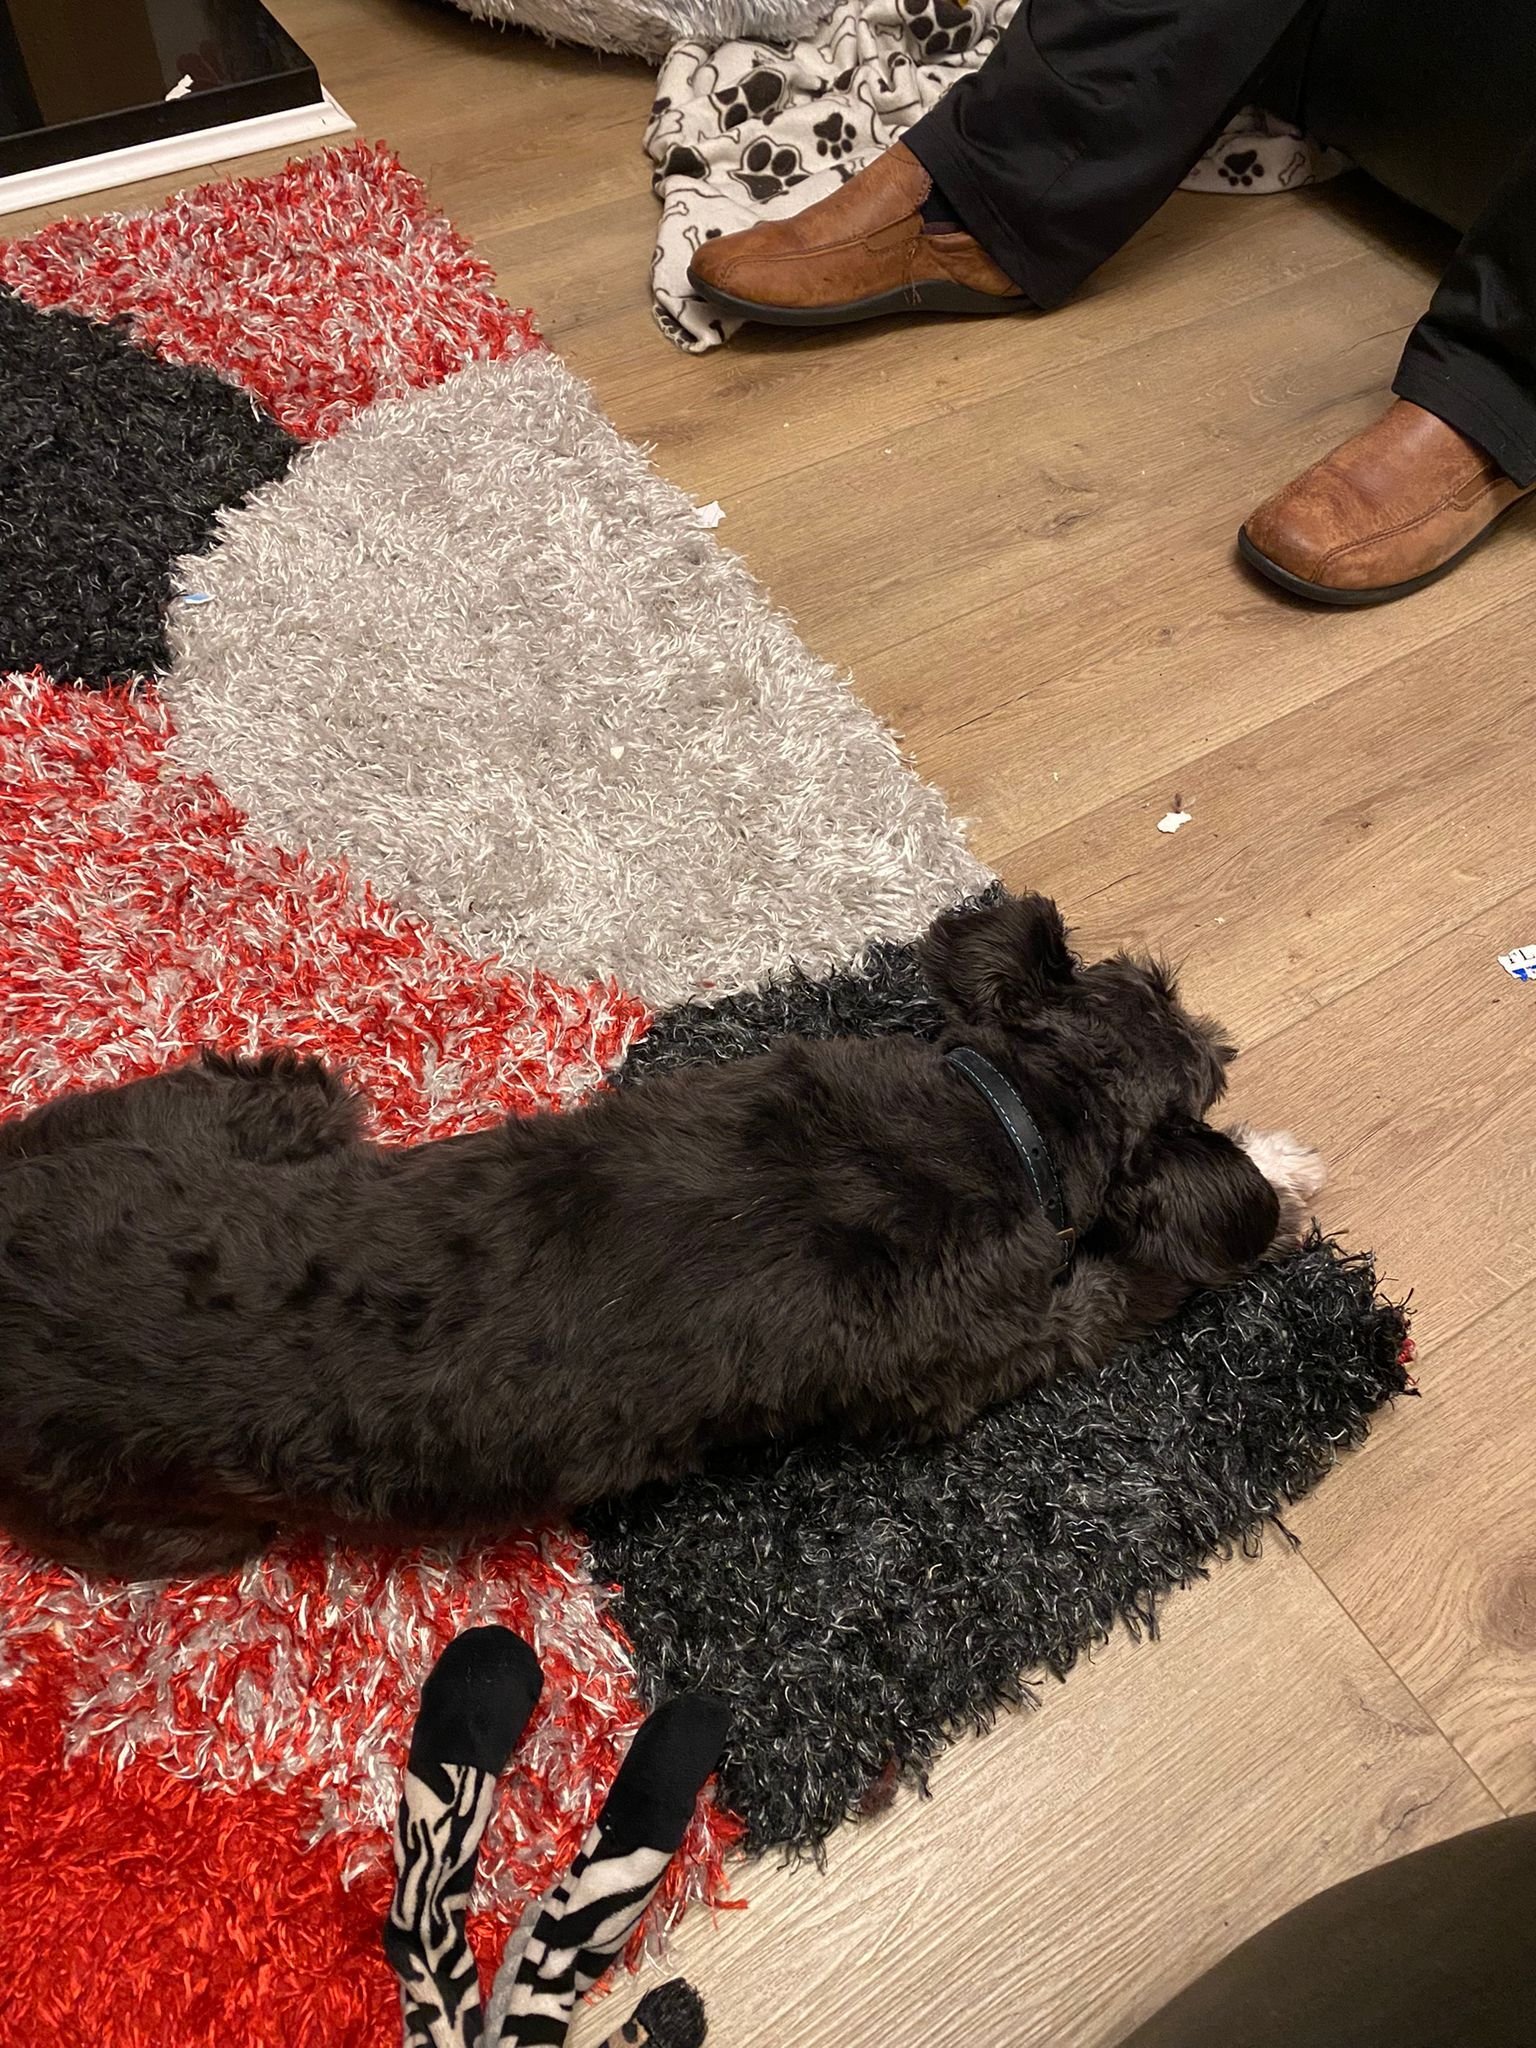 Bailey Miniature Schnauzer not at all affected by fireworks